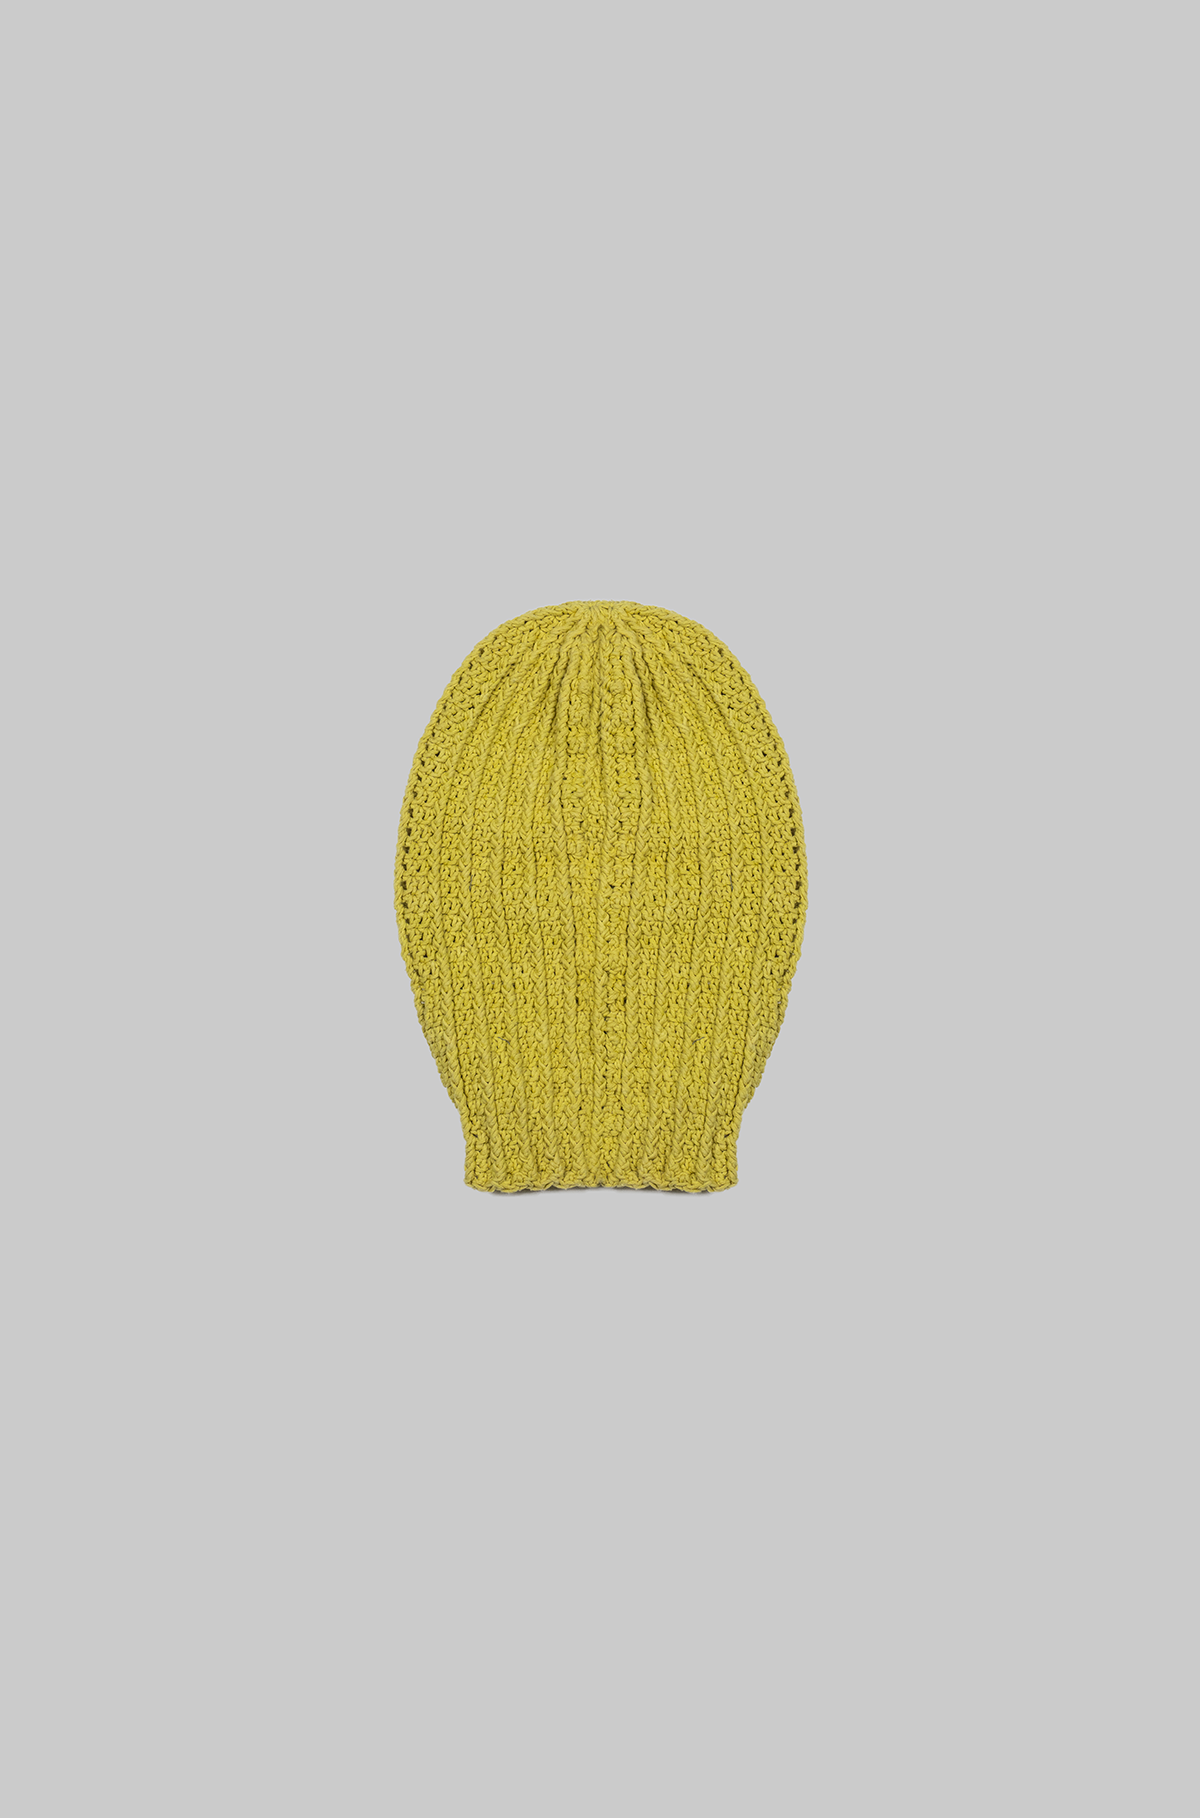 Balaclava with natural dye for pre-order